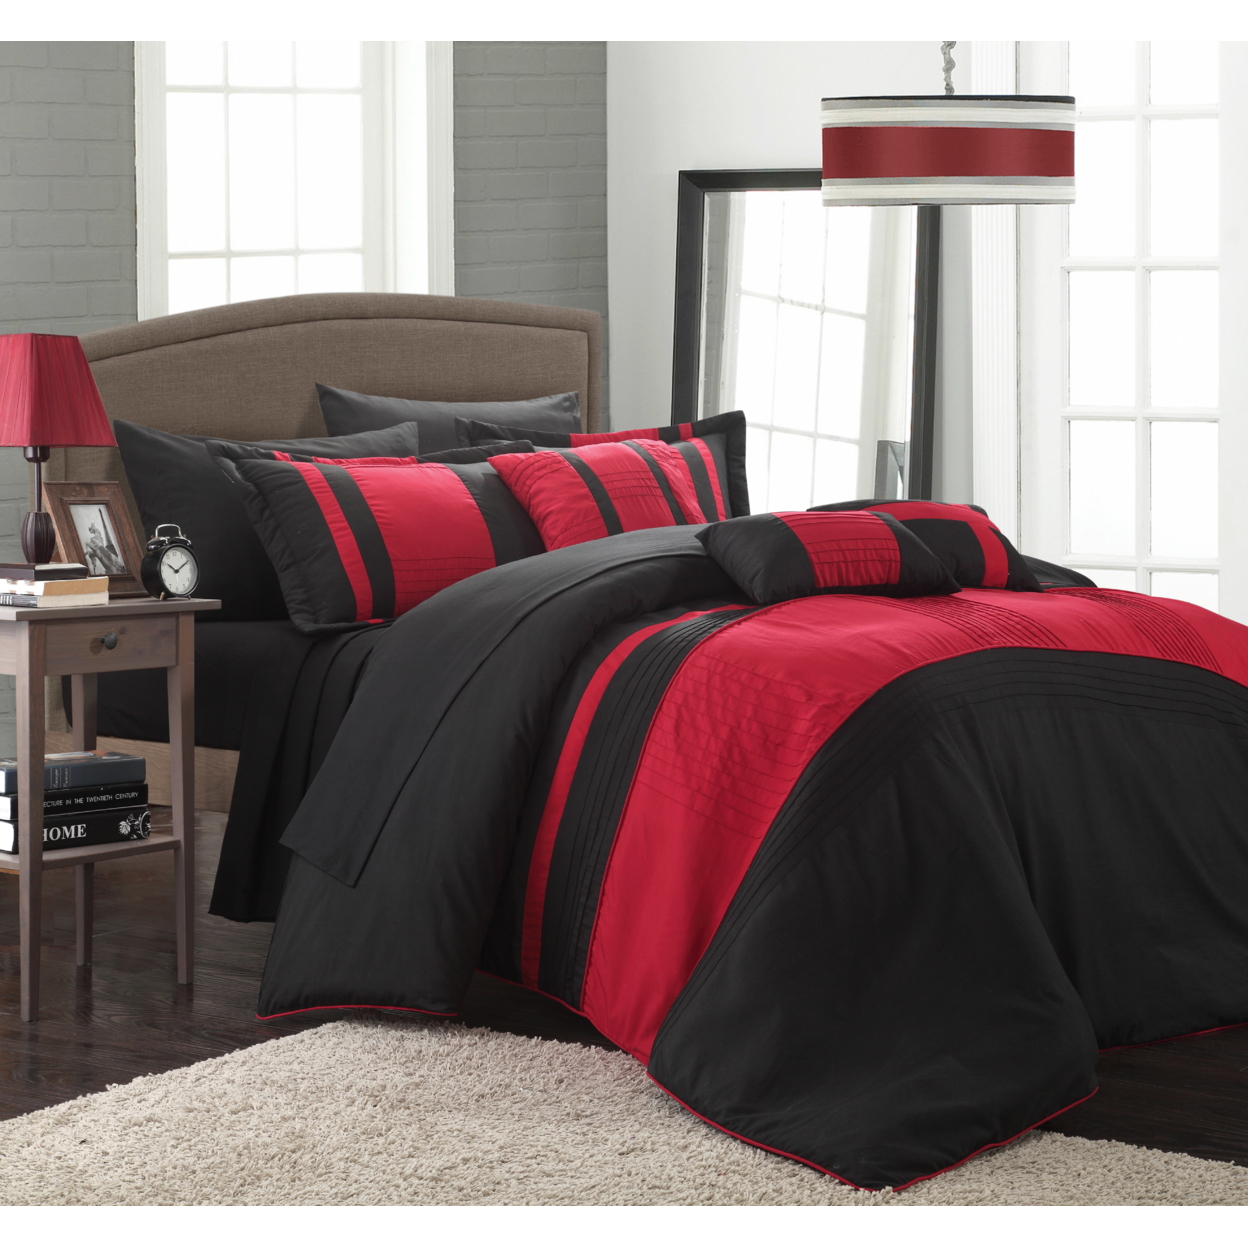 Chic Home Sheila 10-piece Bed-in-a-Bag Comforter Set - Red, Queen